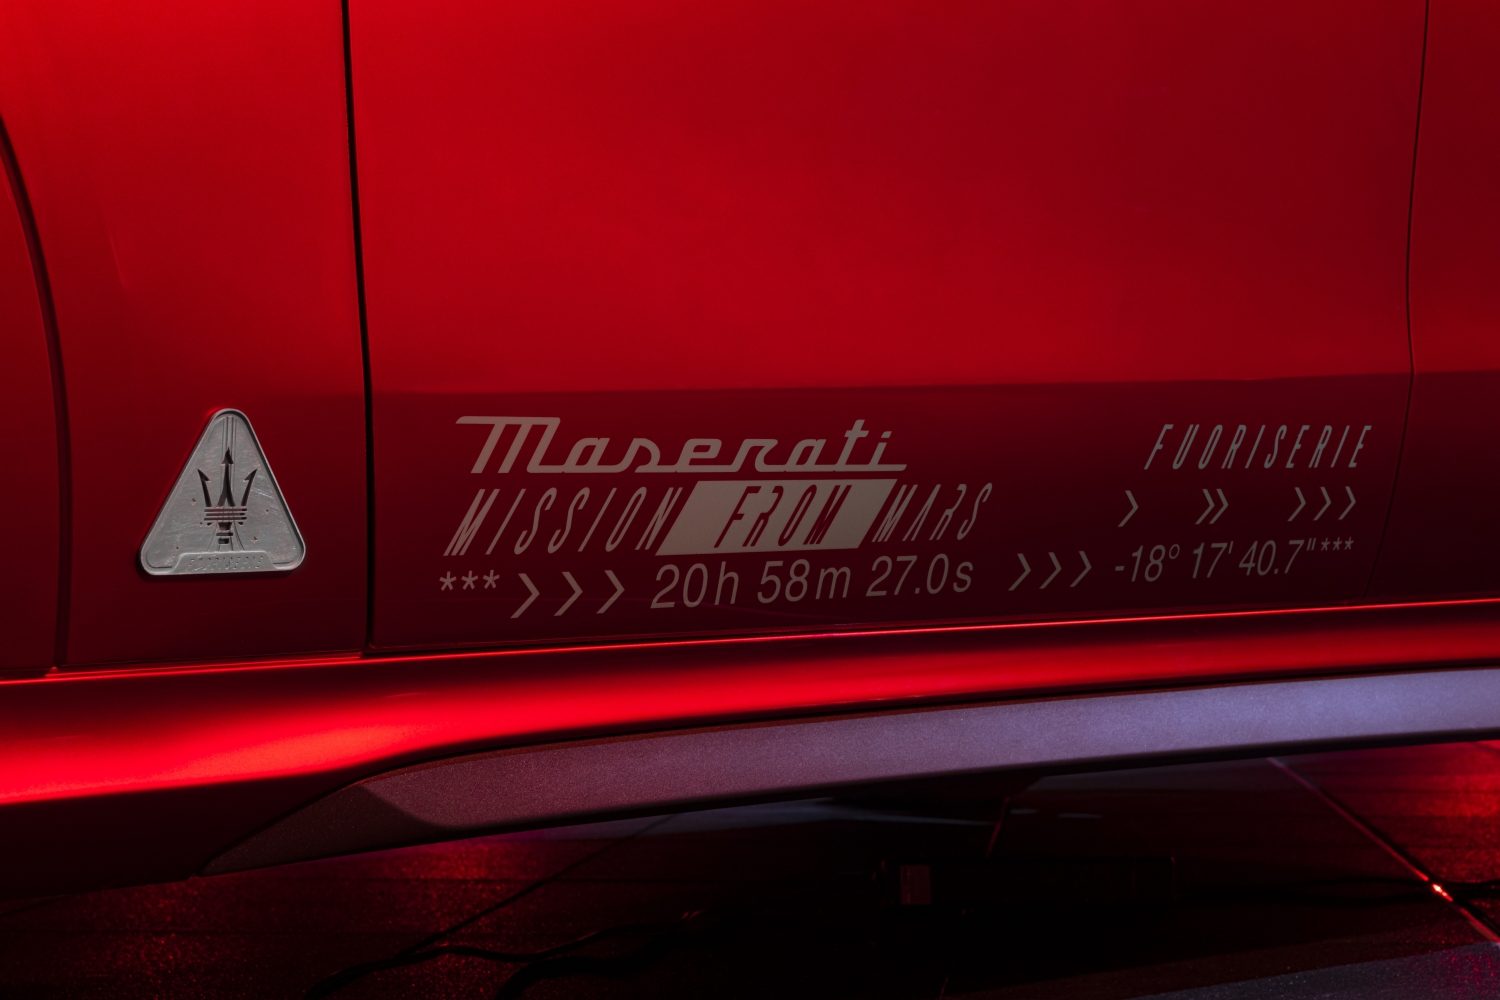 Decals on the side of the Maserati Grecale Mission to Mars bespoke car